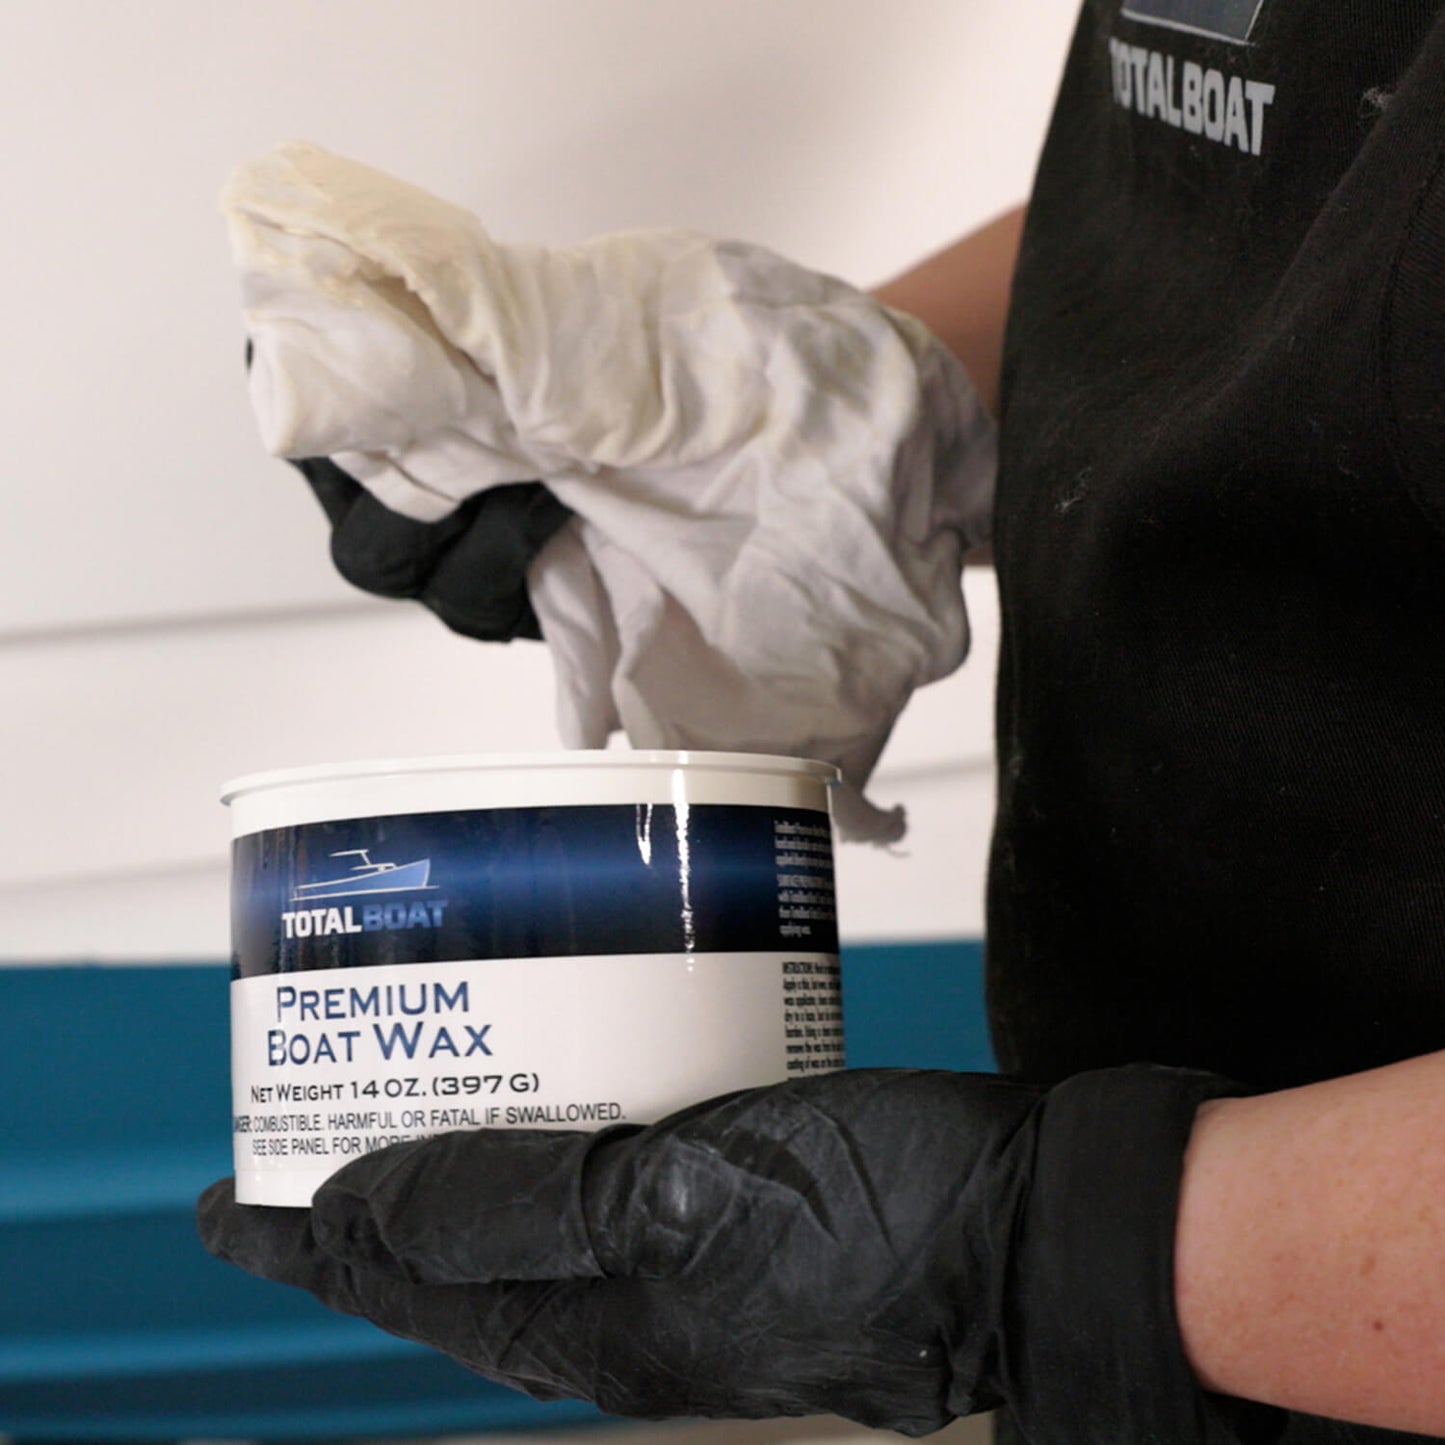 TotalBoat Premium Boat Wax being applied to a boat with a rag